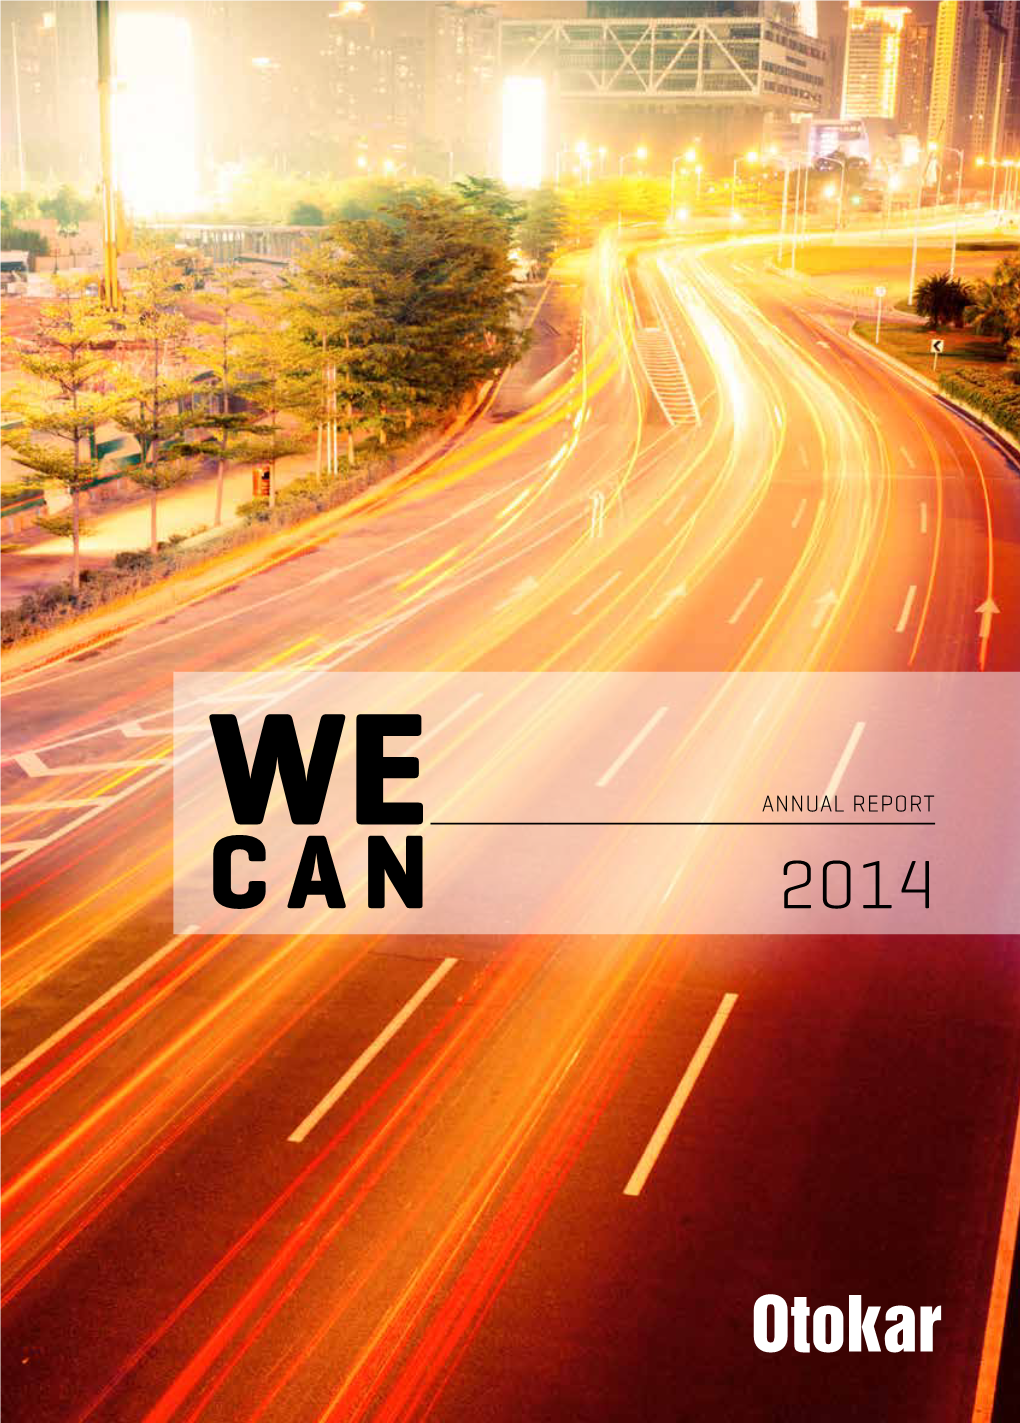 Annual Report Can 2014